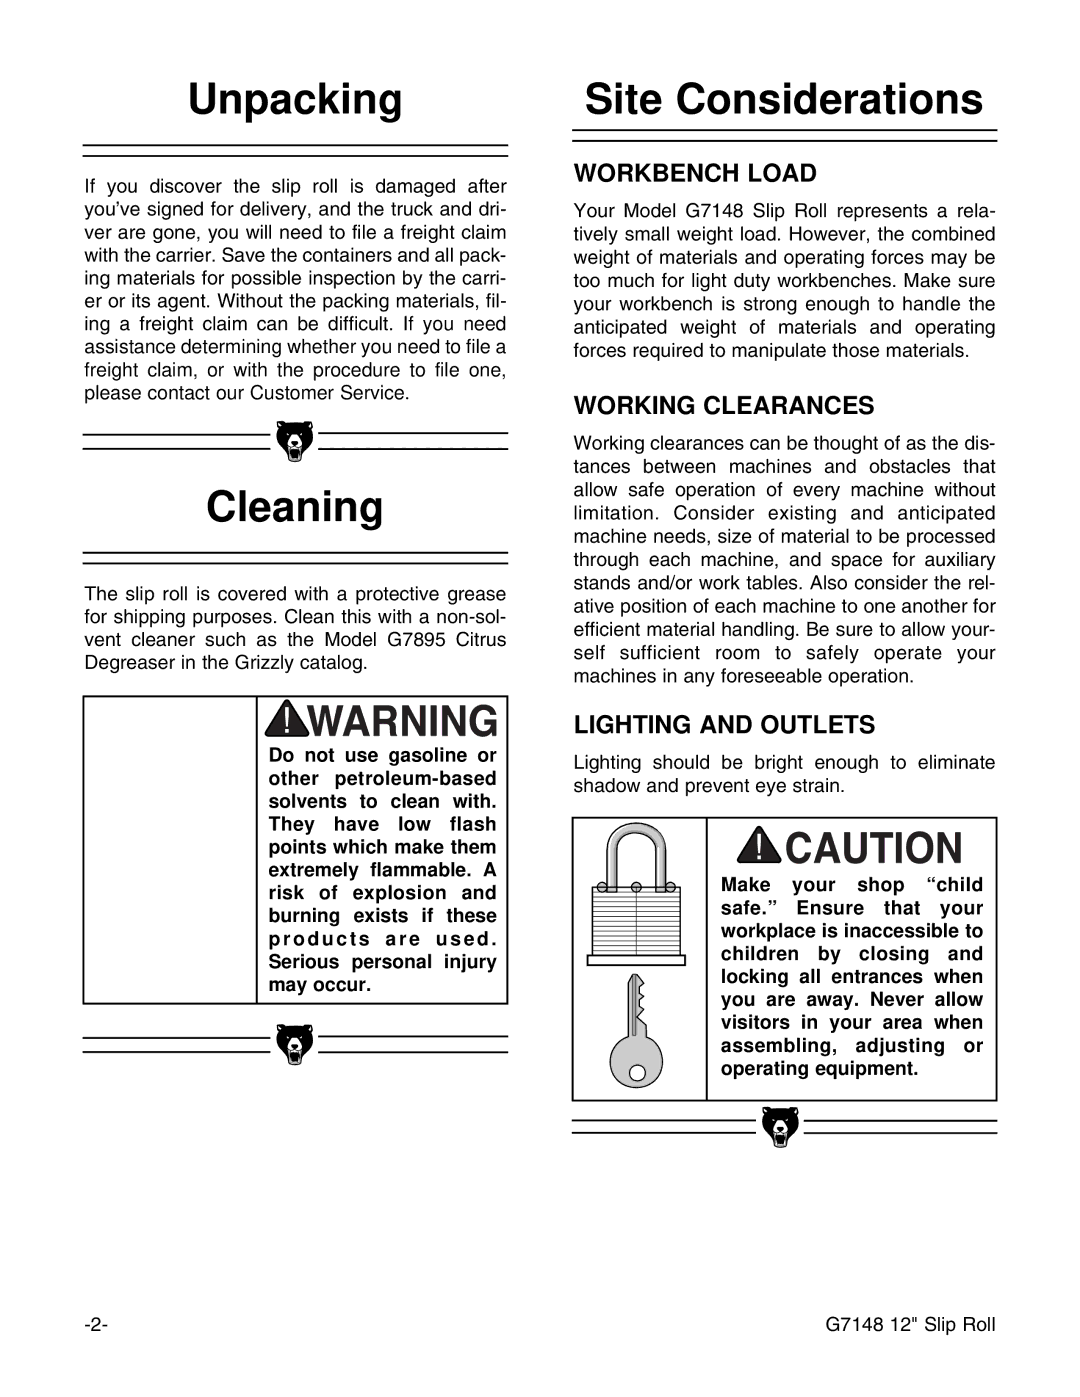 Grizzly G7148 instruction manual Unpacking, Cleaning, Site Considerations 